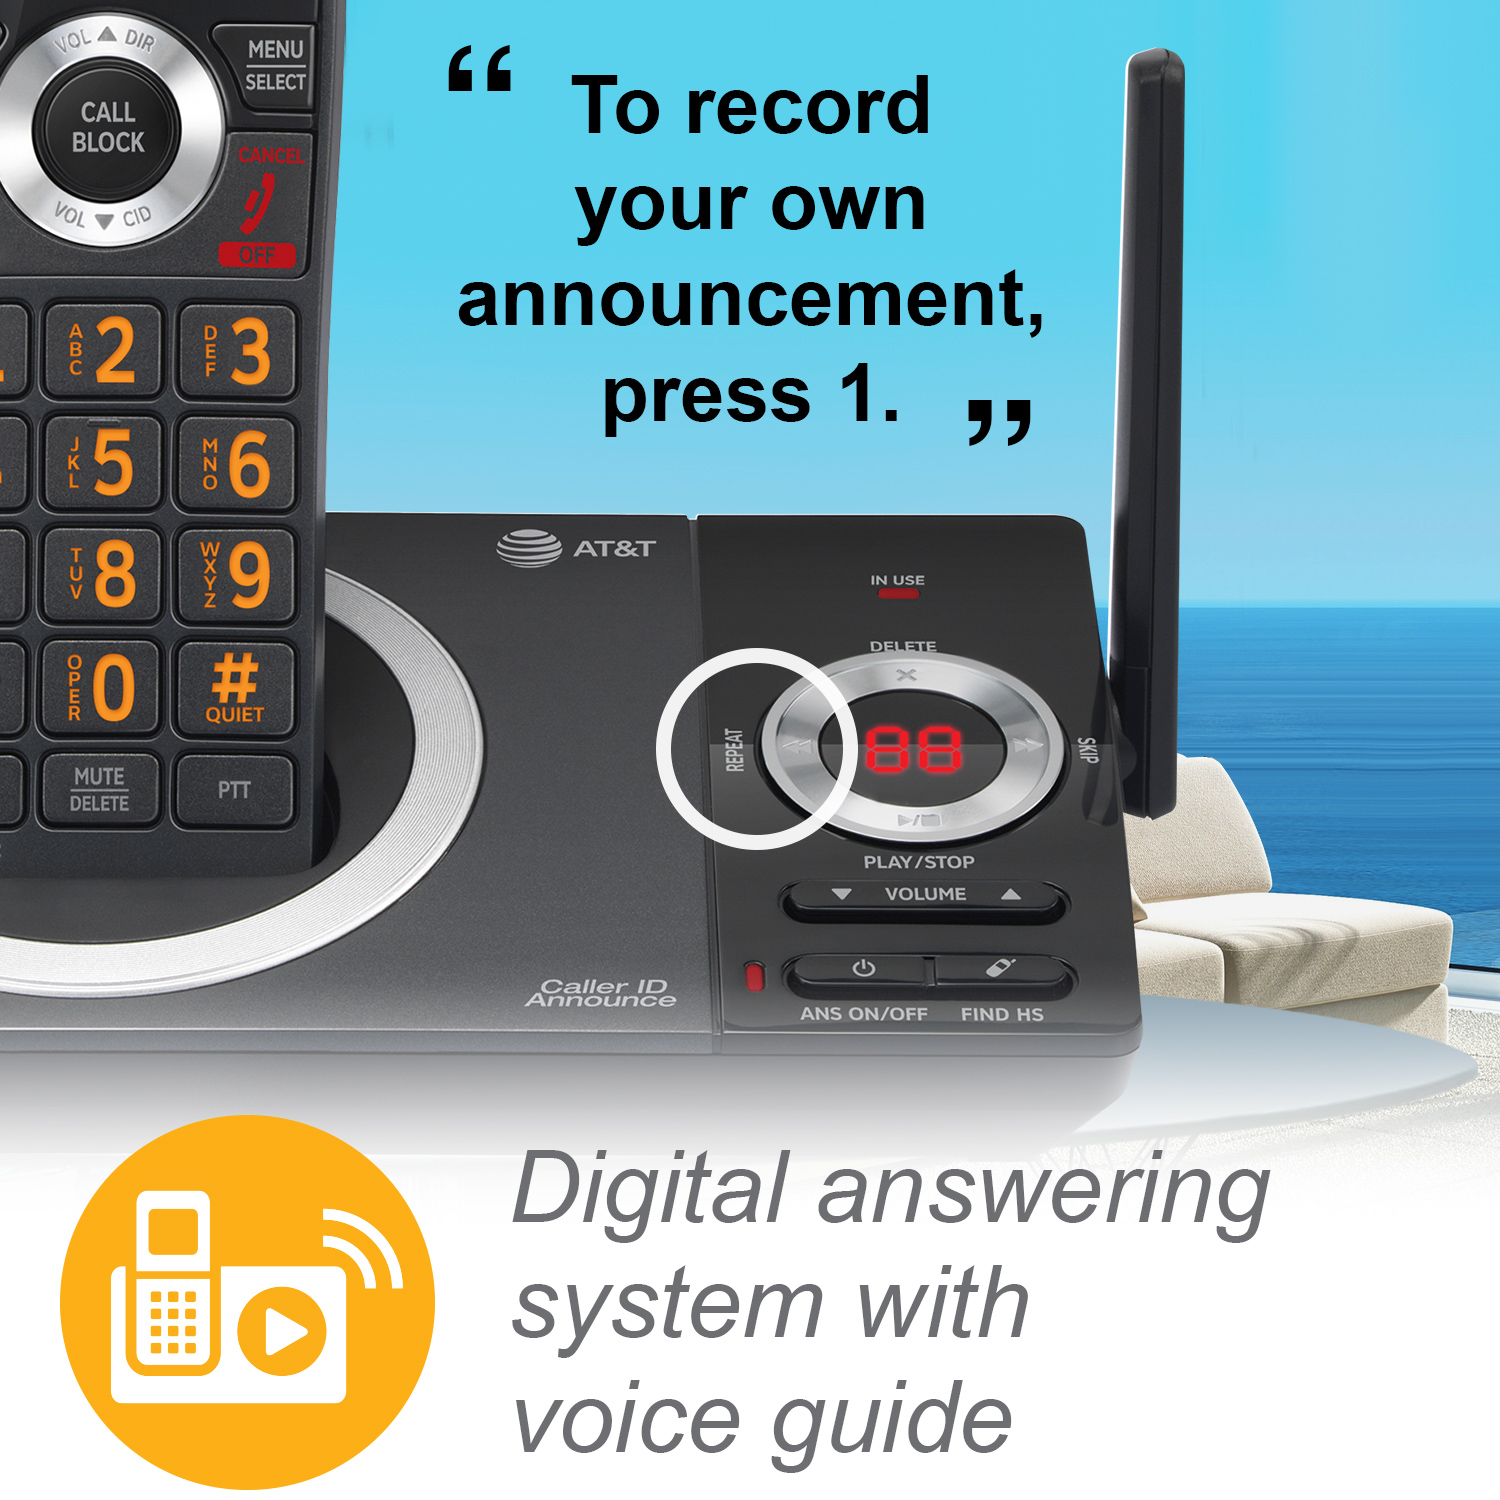 3-Handset Expandable Cordless Phone with Unsurpassed Range, Smart Call Blocker and Answering System - view 4